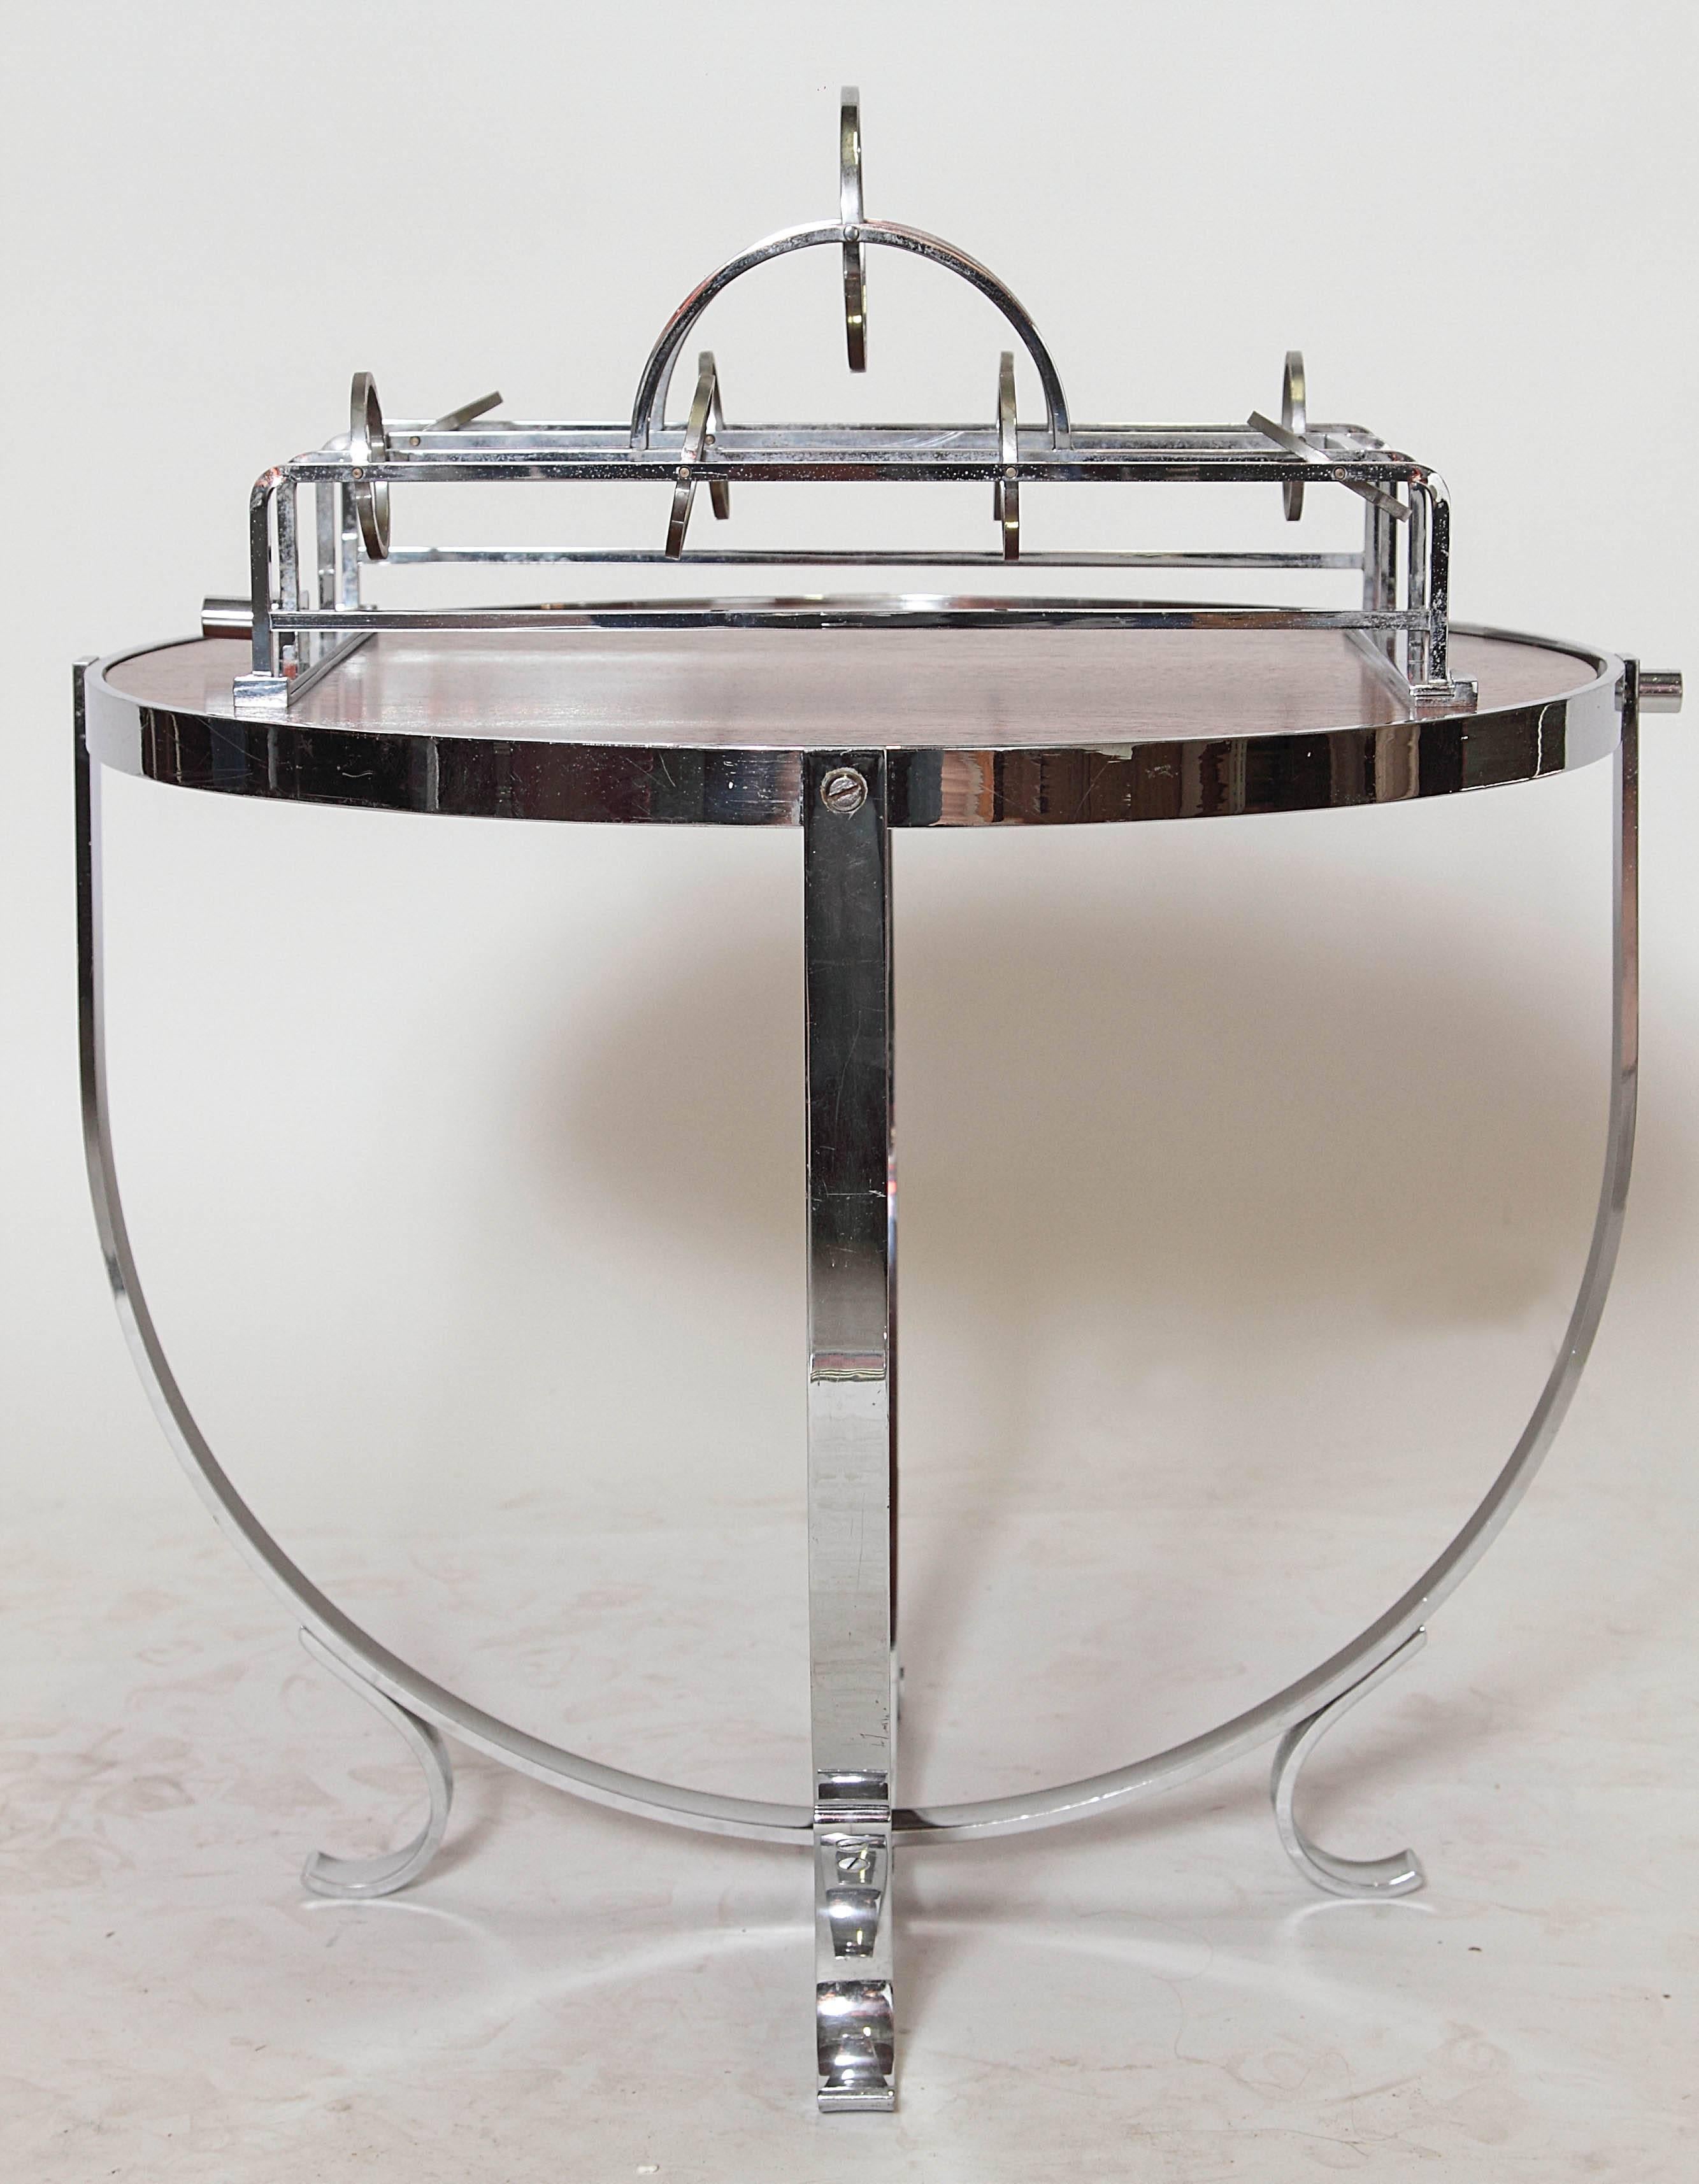 Machine Age Art Deco Streamline Cruise Liner or Pullman Car Cocktail Table For Sale 4